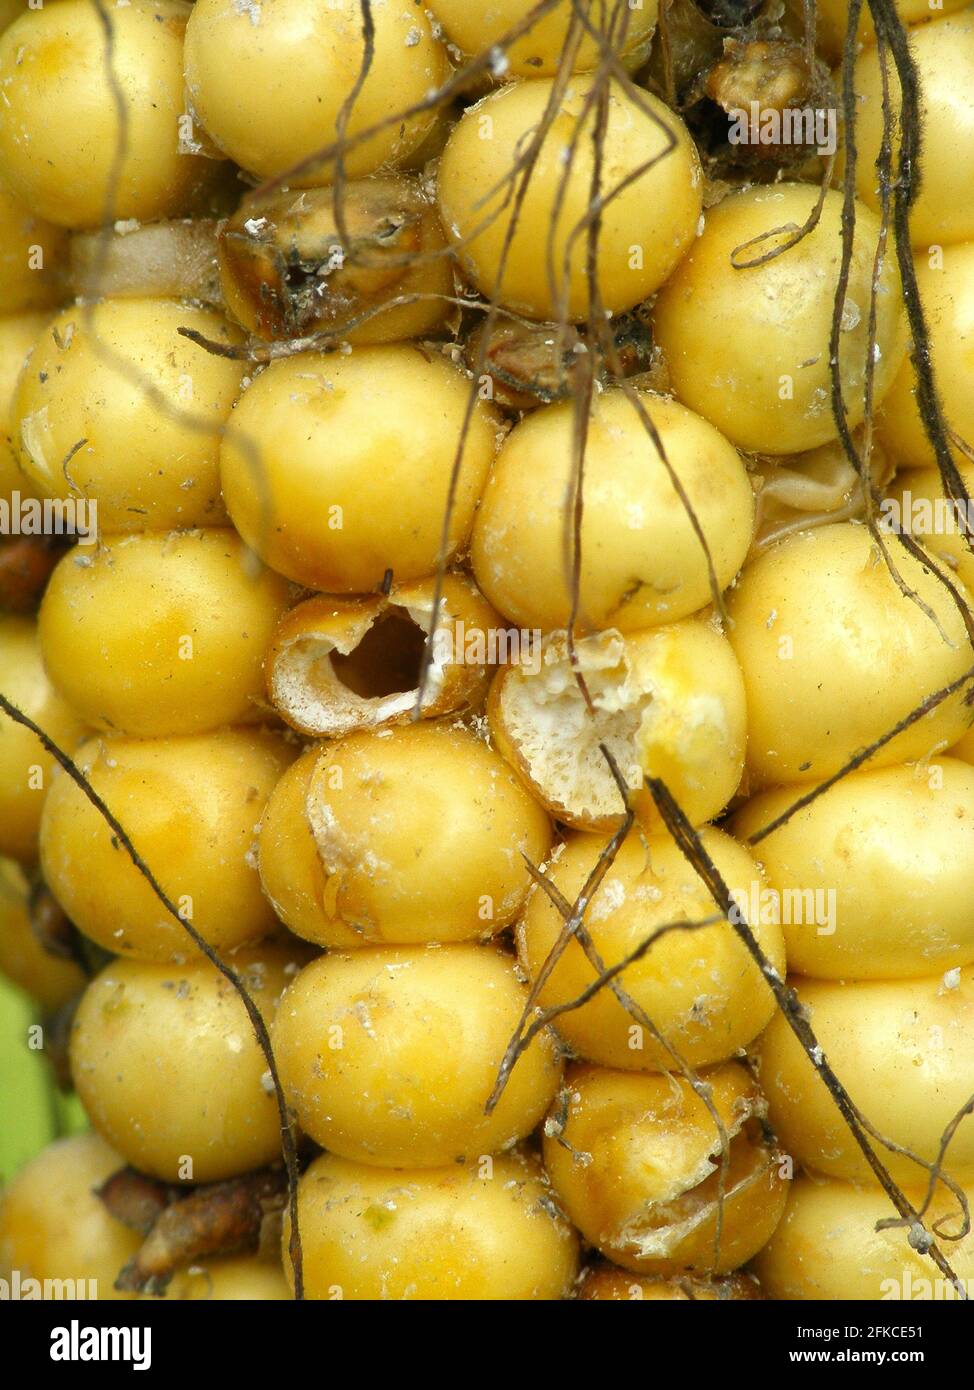 Corn cob and grains damaged by Glischrochilus quadrisignatus (Nitidulidae) Four-spotted Sap Beetle. Stock Photo